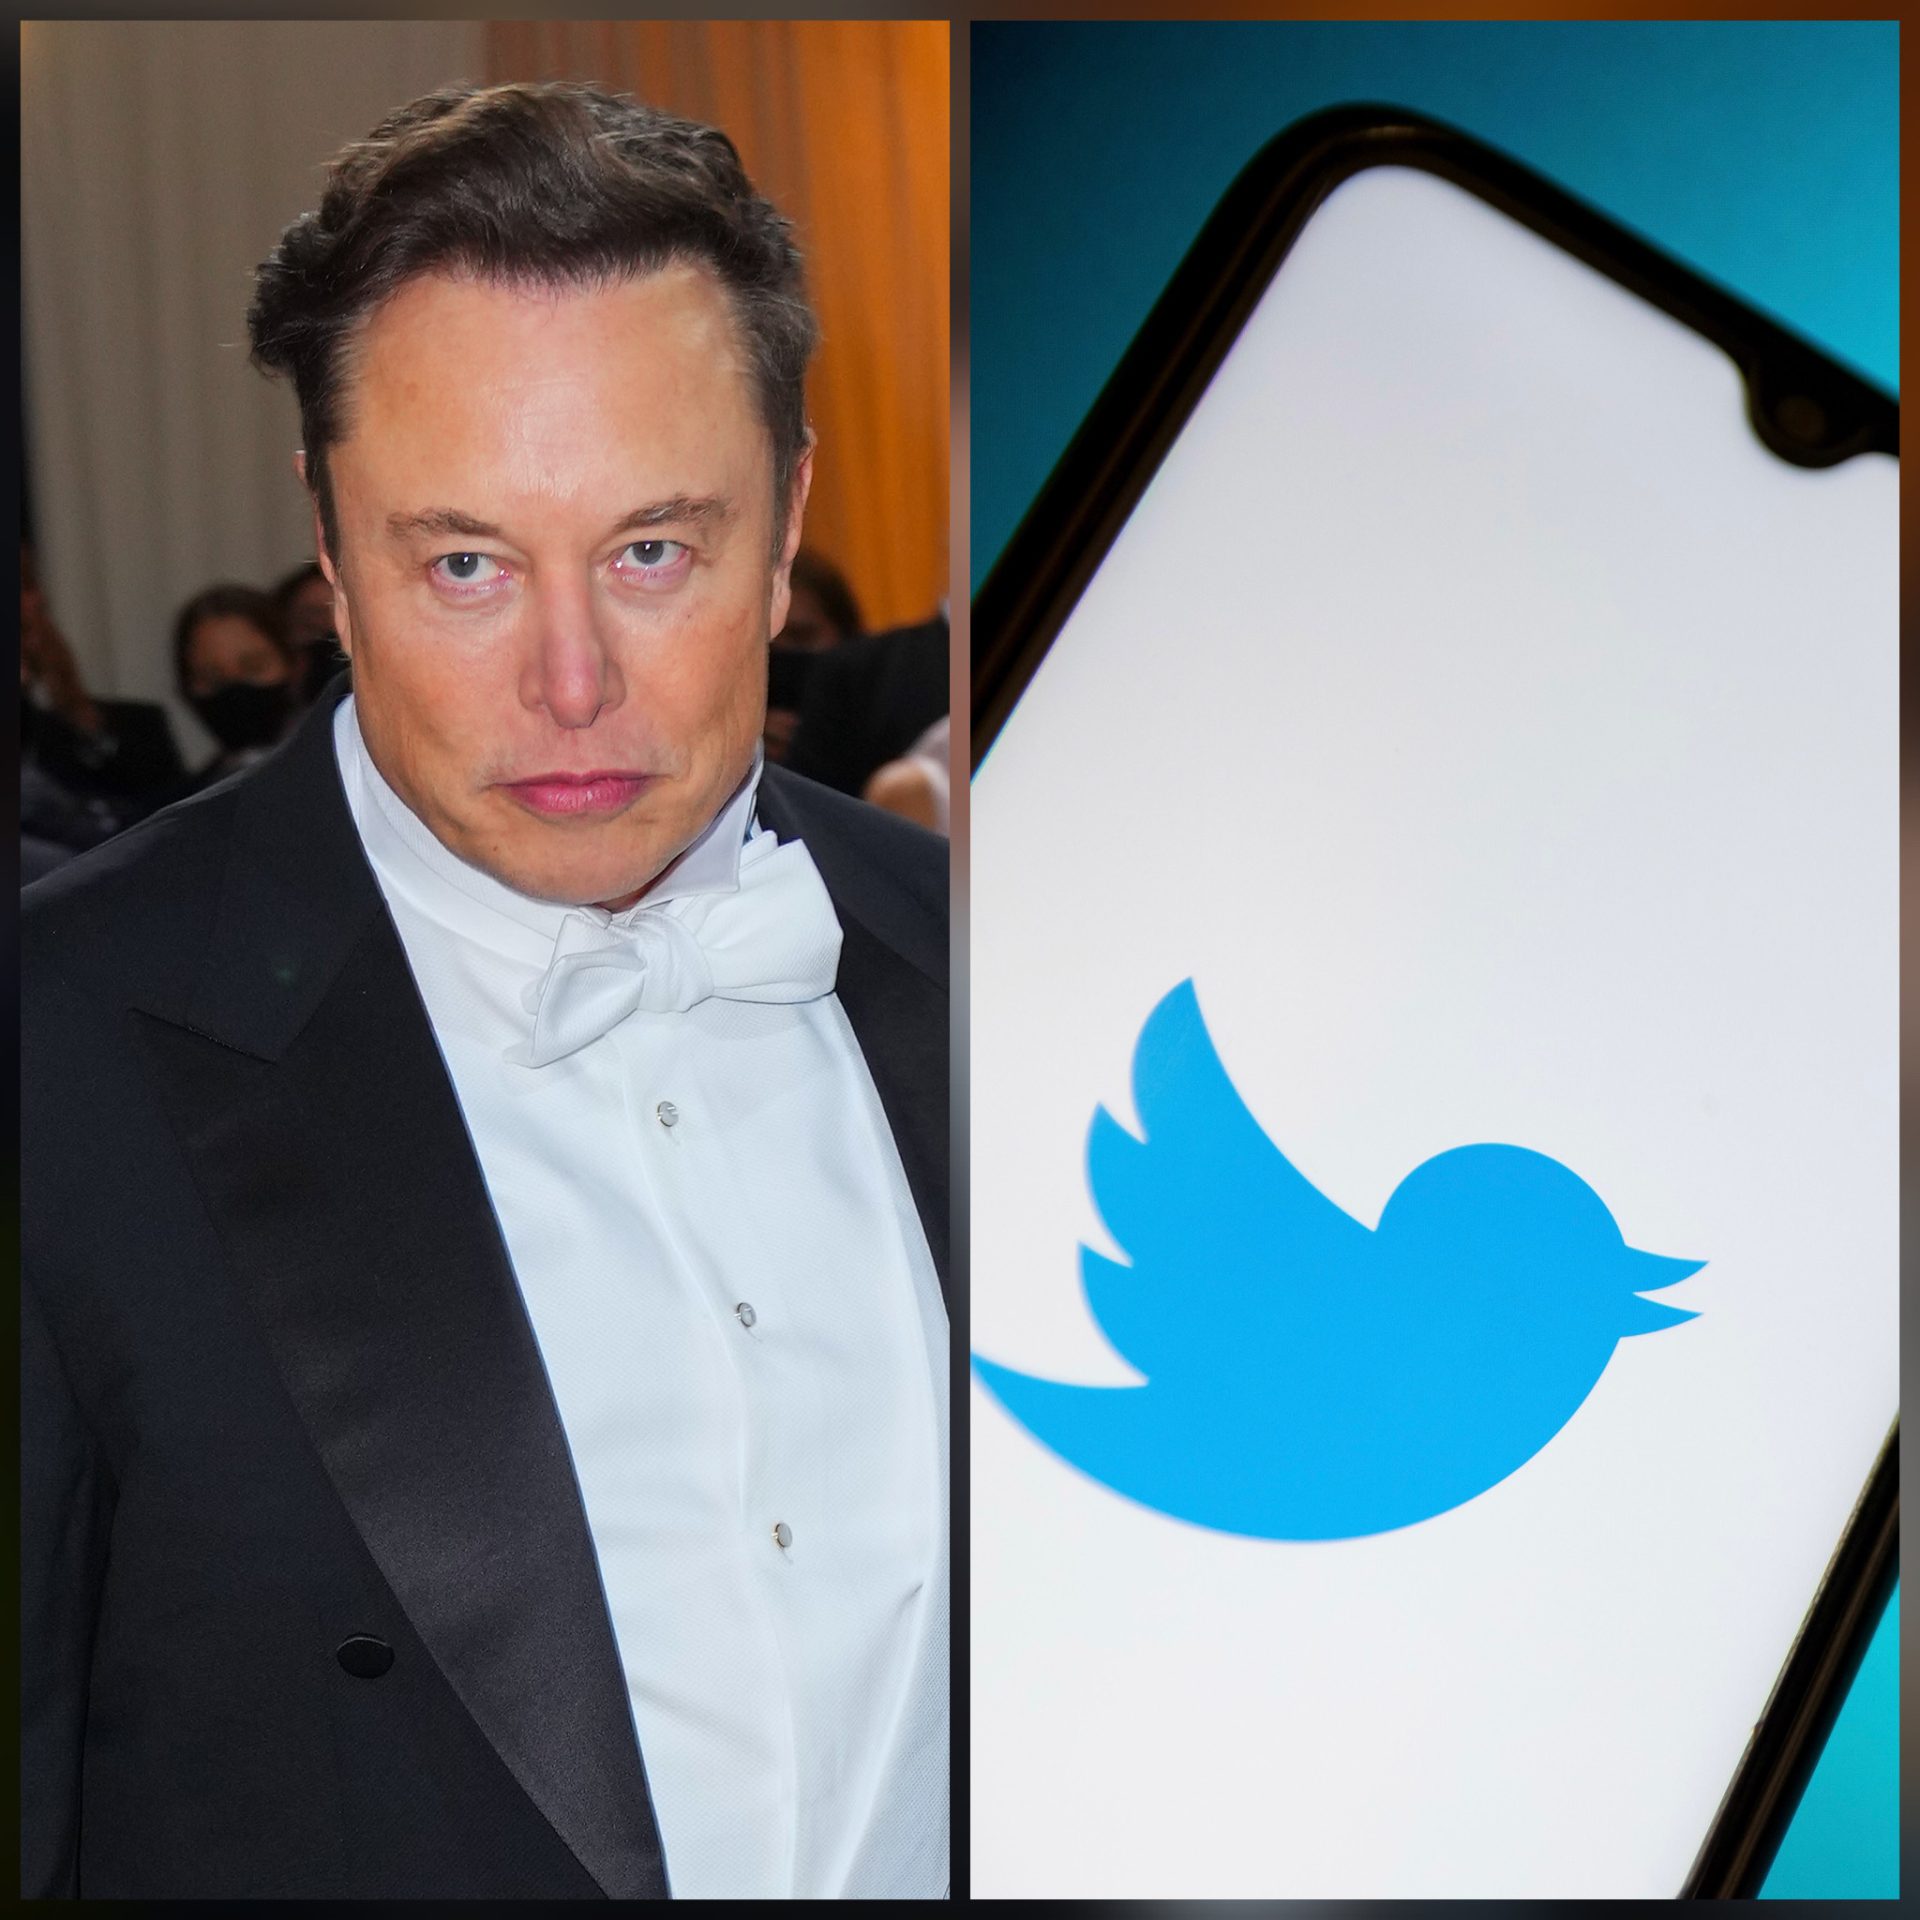 Judge Rules That Twitter’s Lawsuit Against Elon Musk Can Proceed With Five-Day Trial Beginning In October